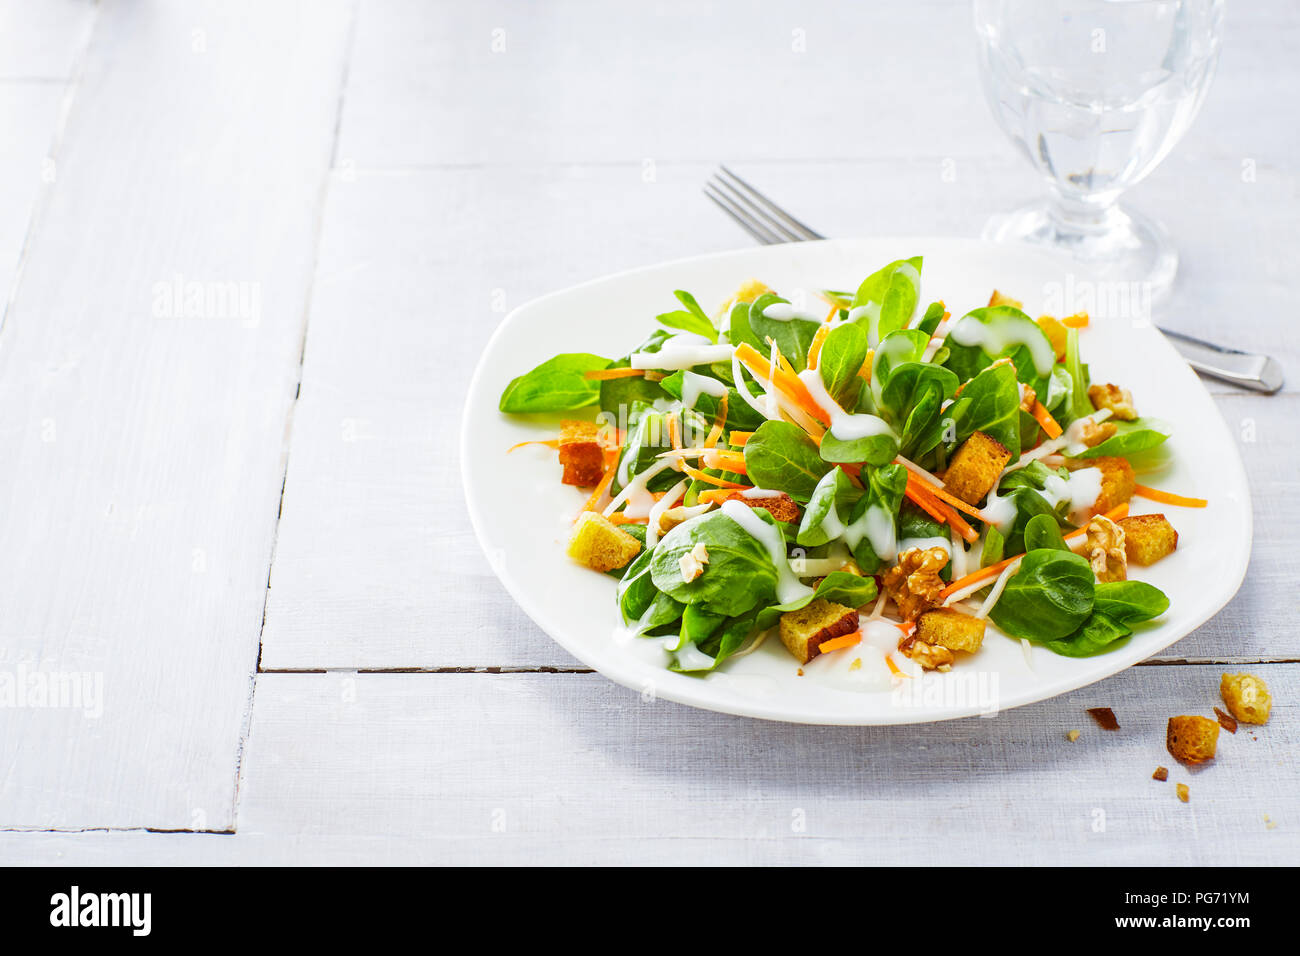 Autumnal salad with lamb's lettuce, carrots, slaw, croutons and walnuts Stock Photo